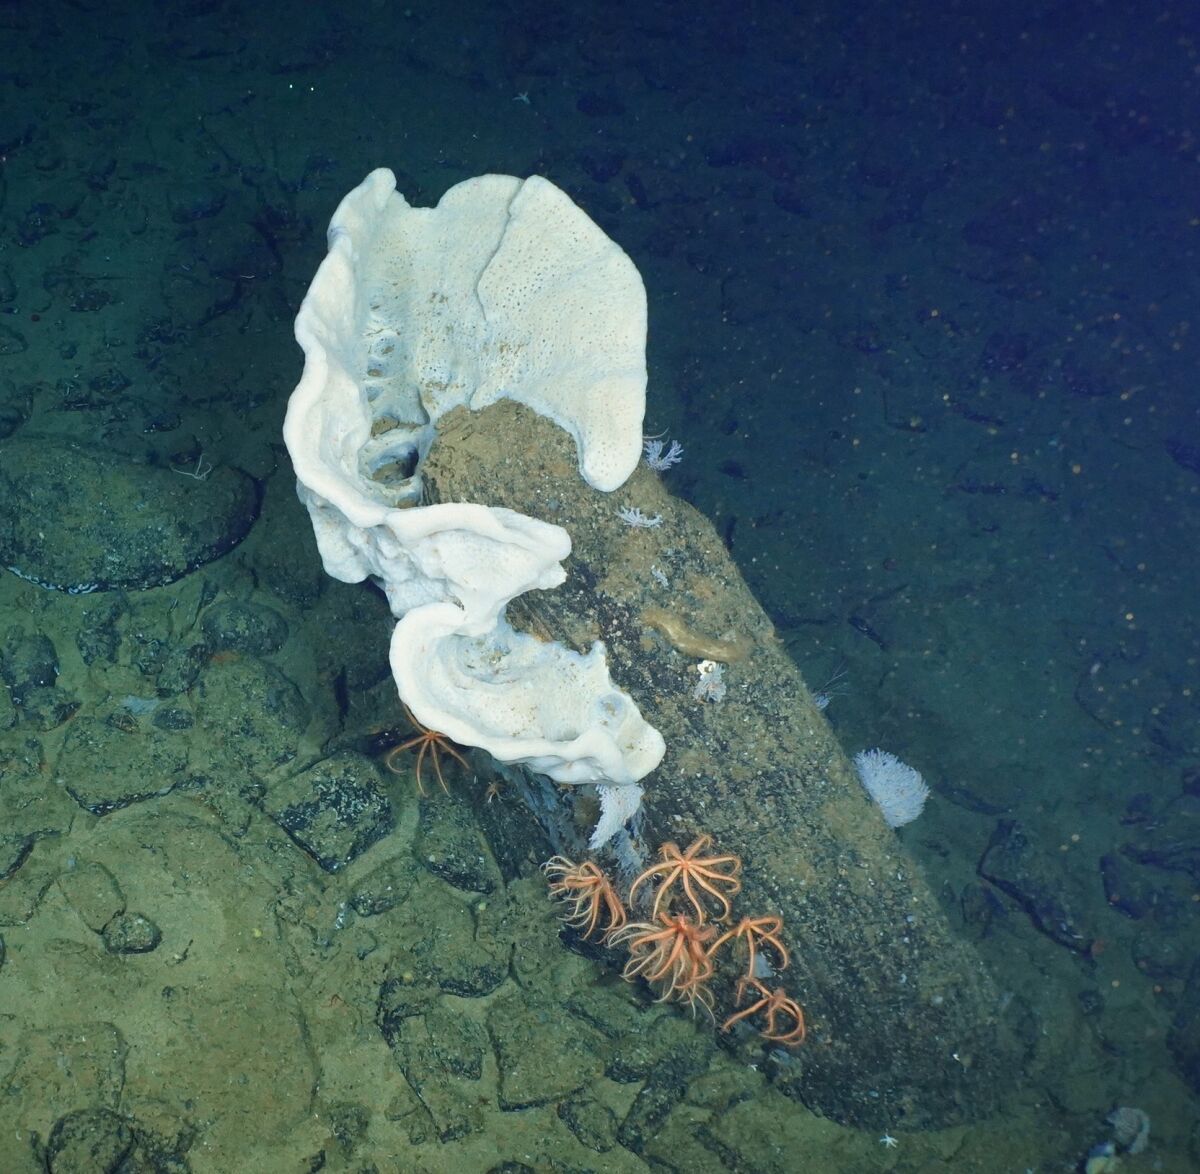 A giant sponge and brisingid asteroids (starfish) are seen during a Scripps Institution of Oceanography research trip.